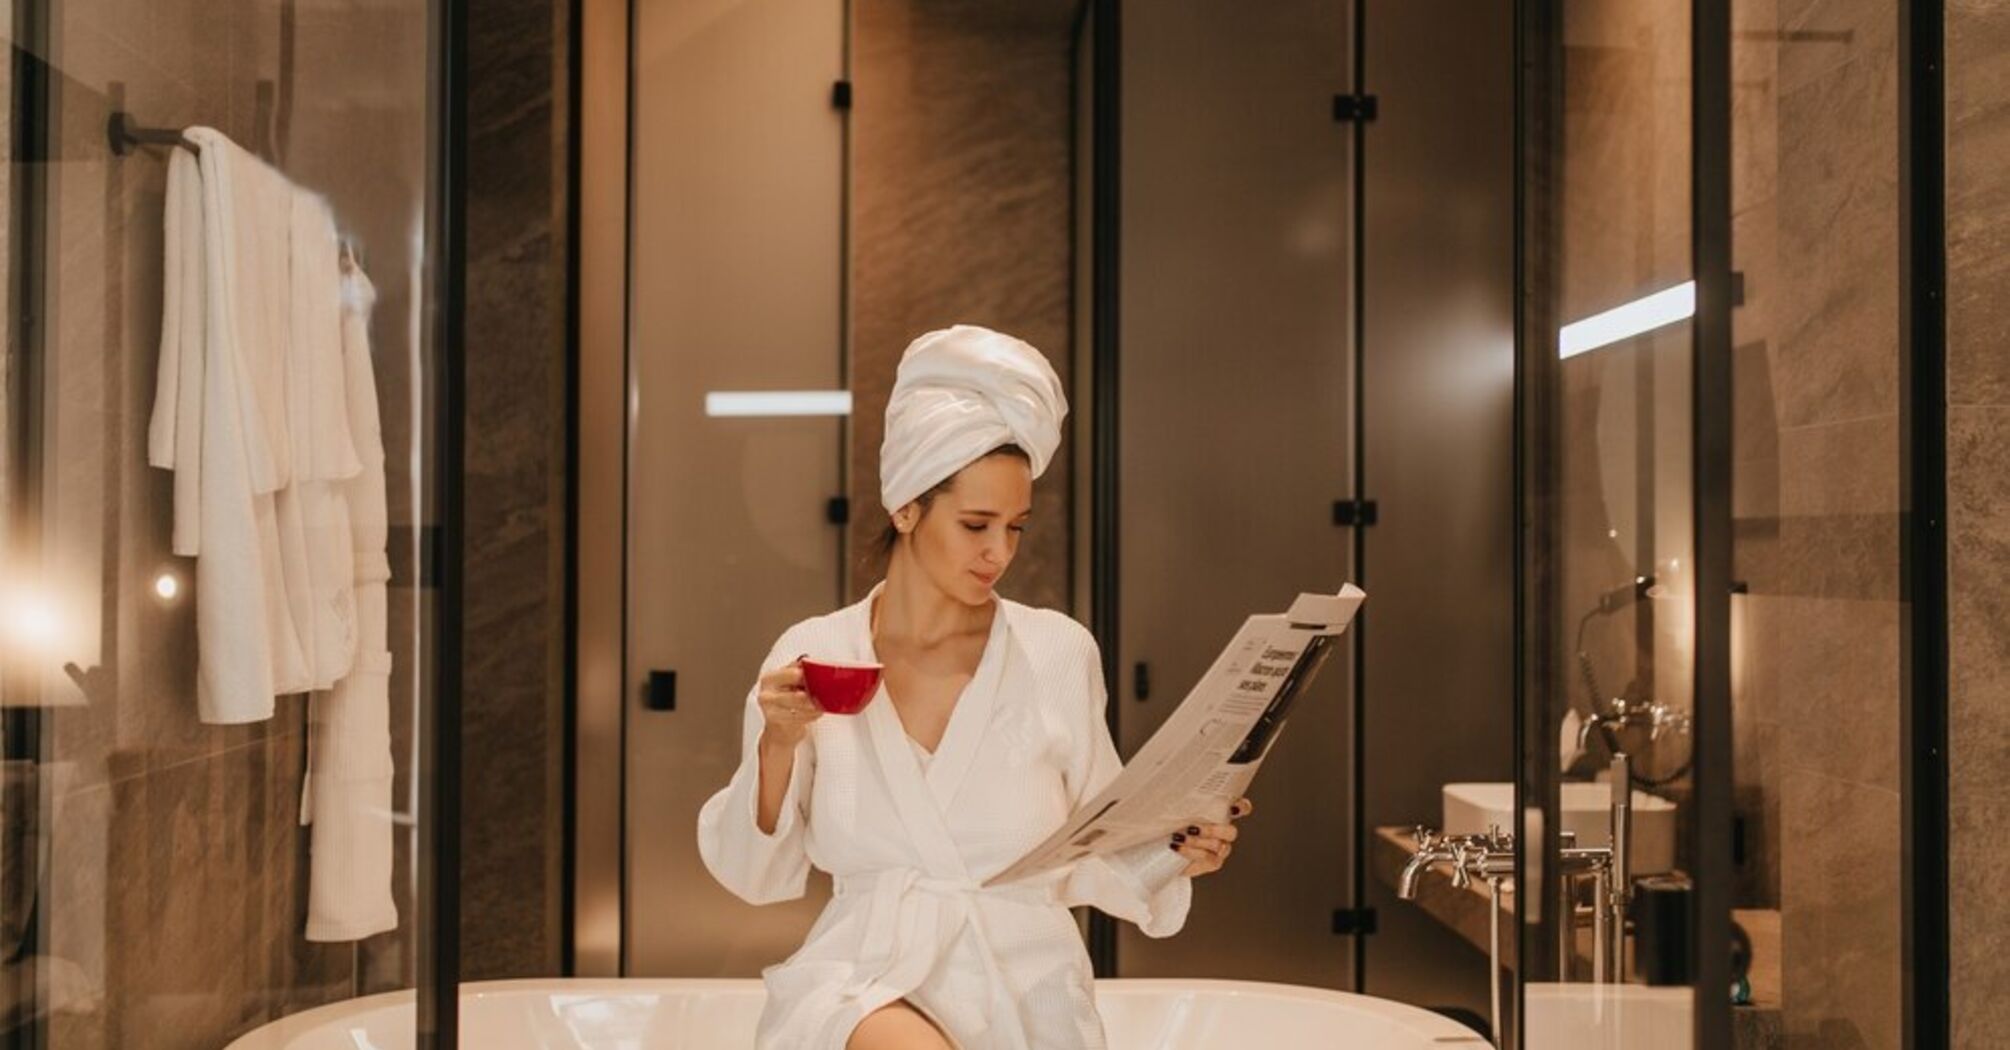 Slippers or bathrobes: what to take with you from the hotel